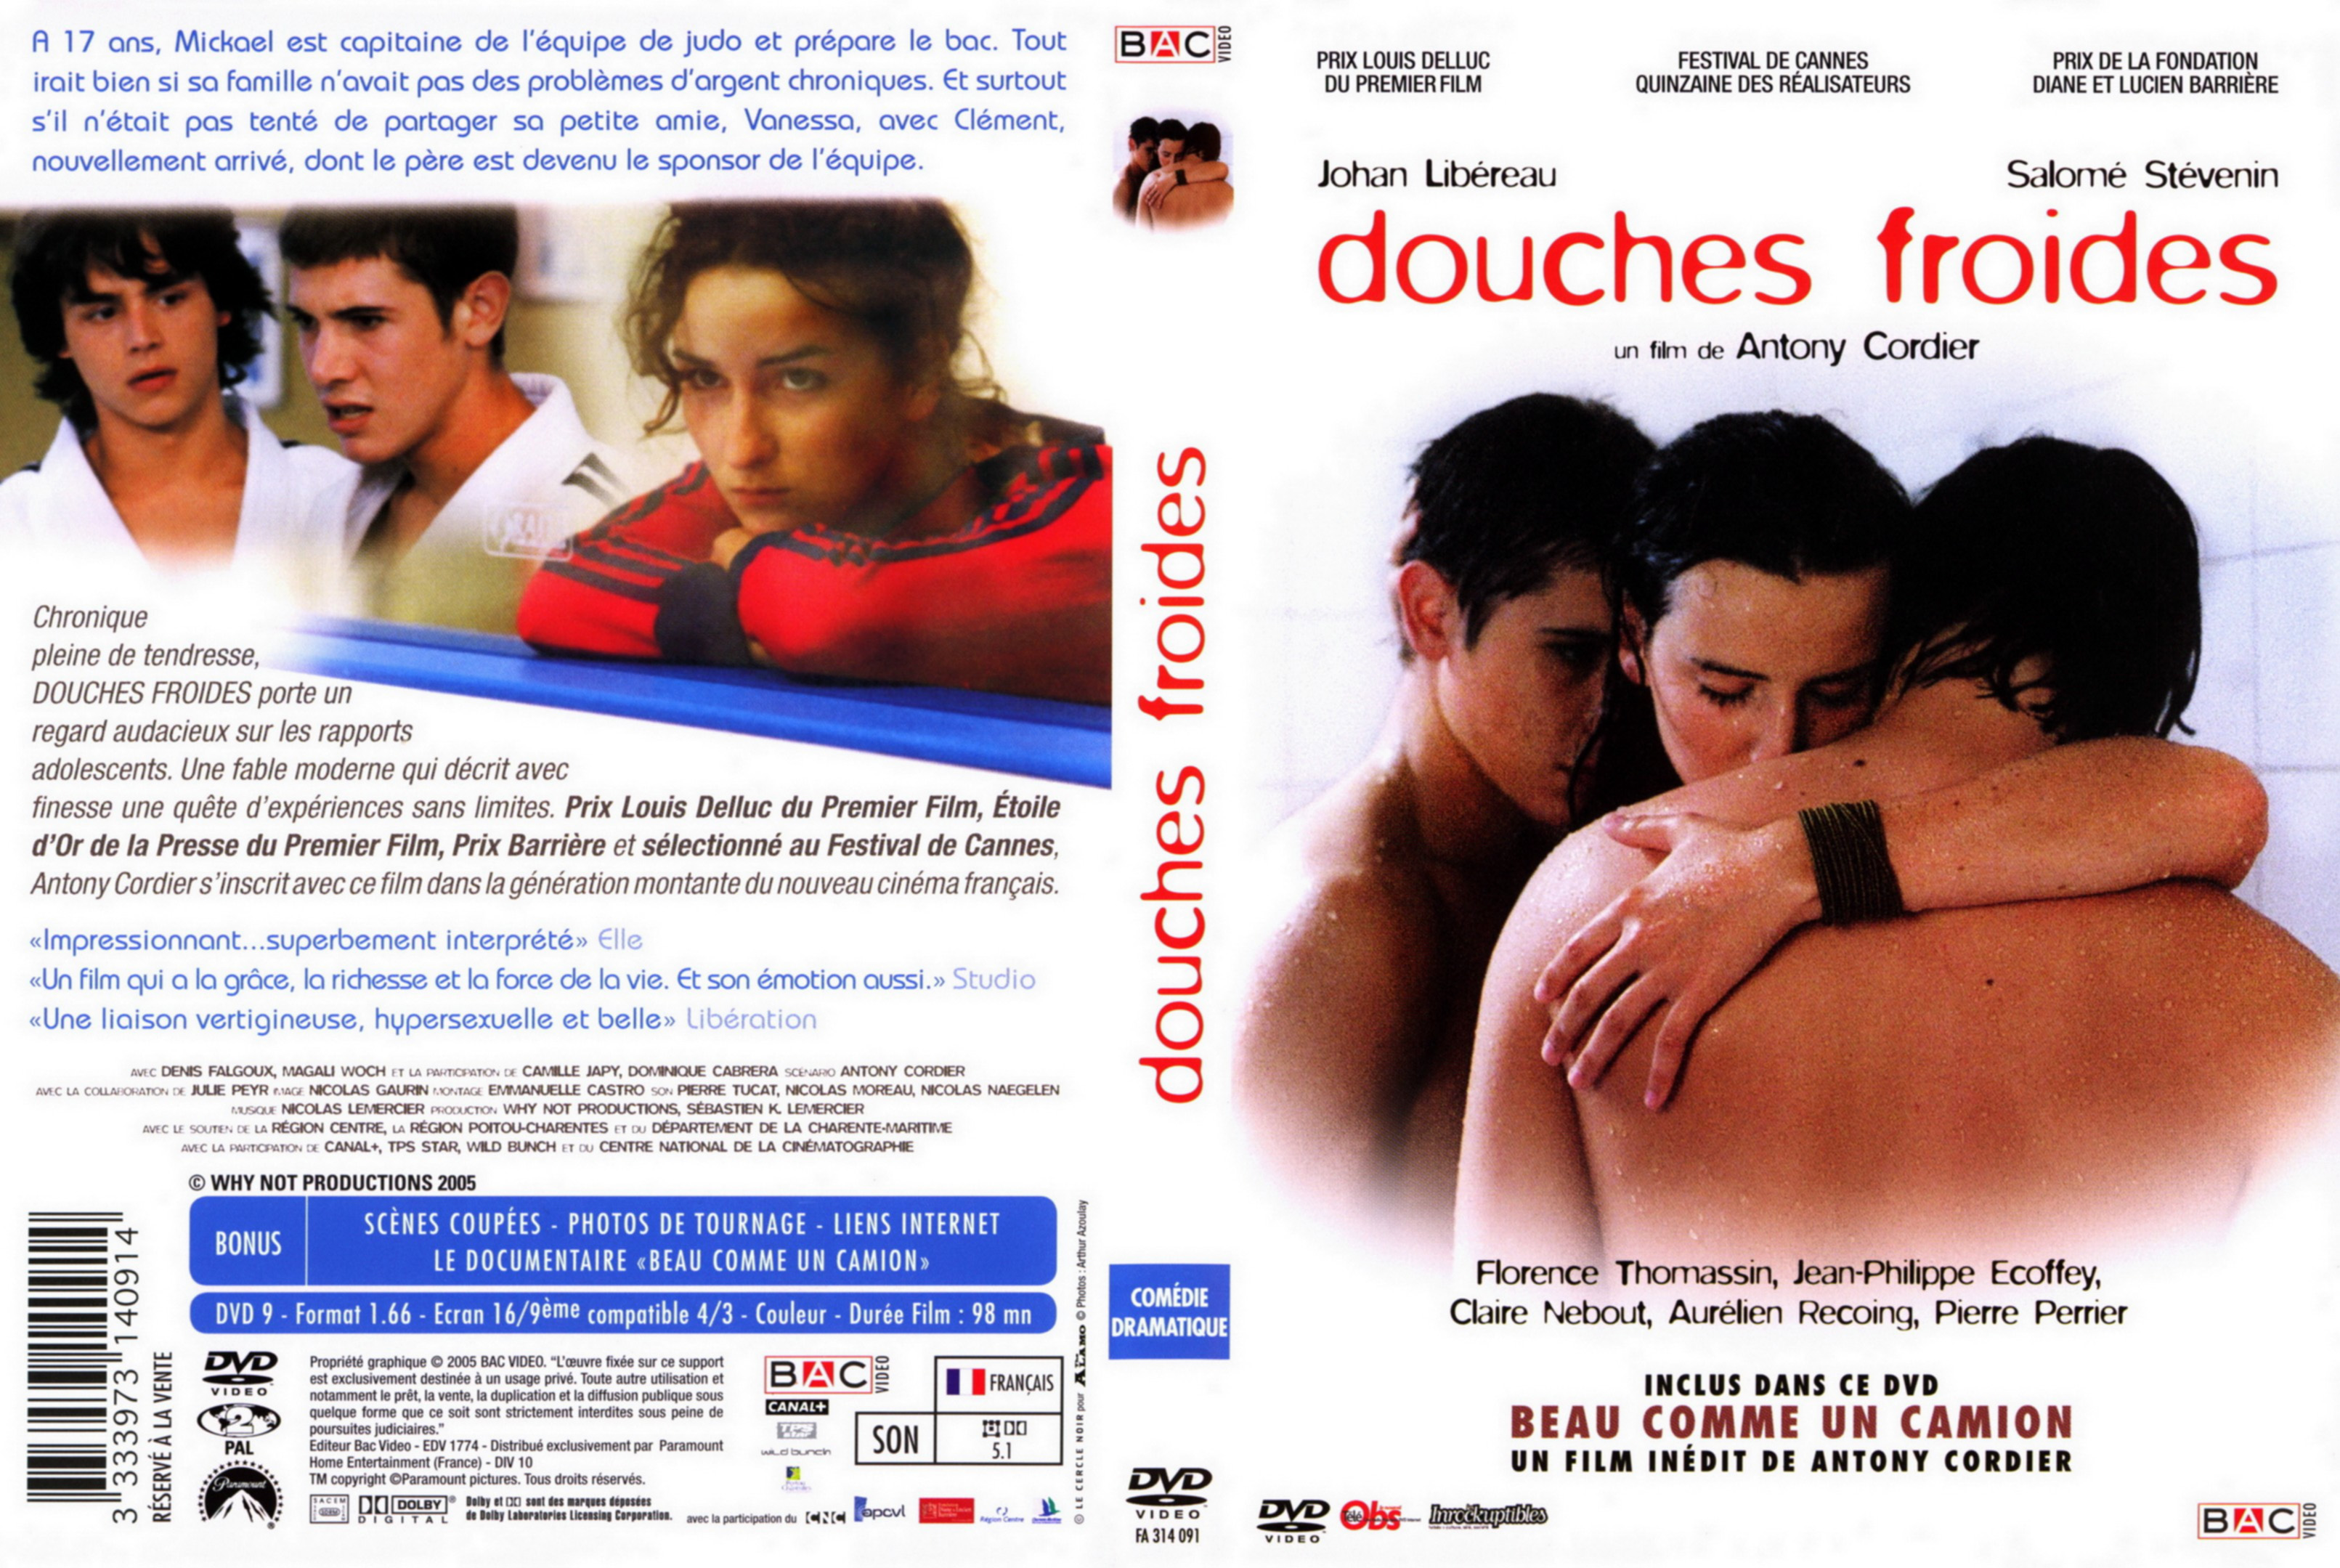 Jaquette DVD Douches froides